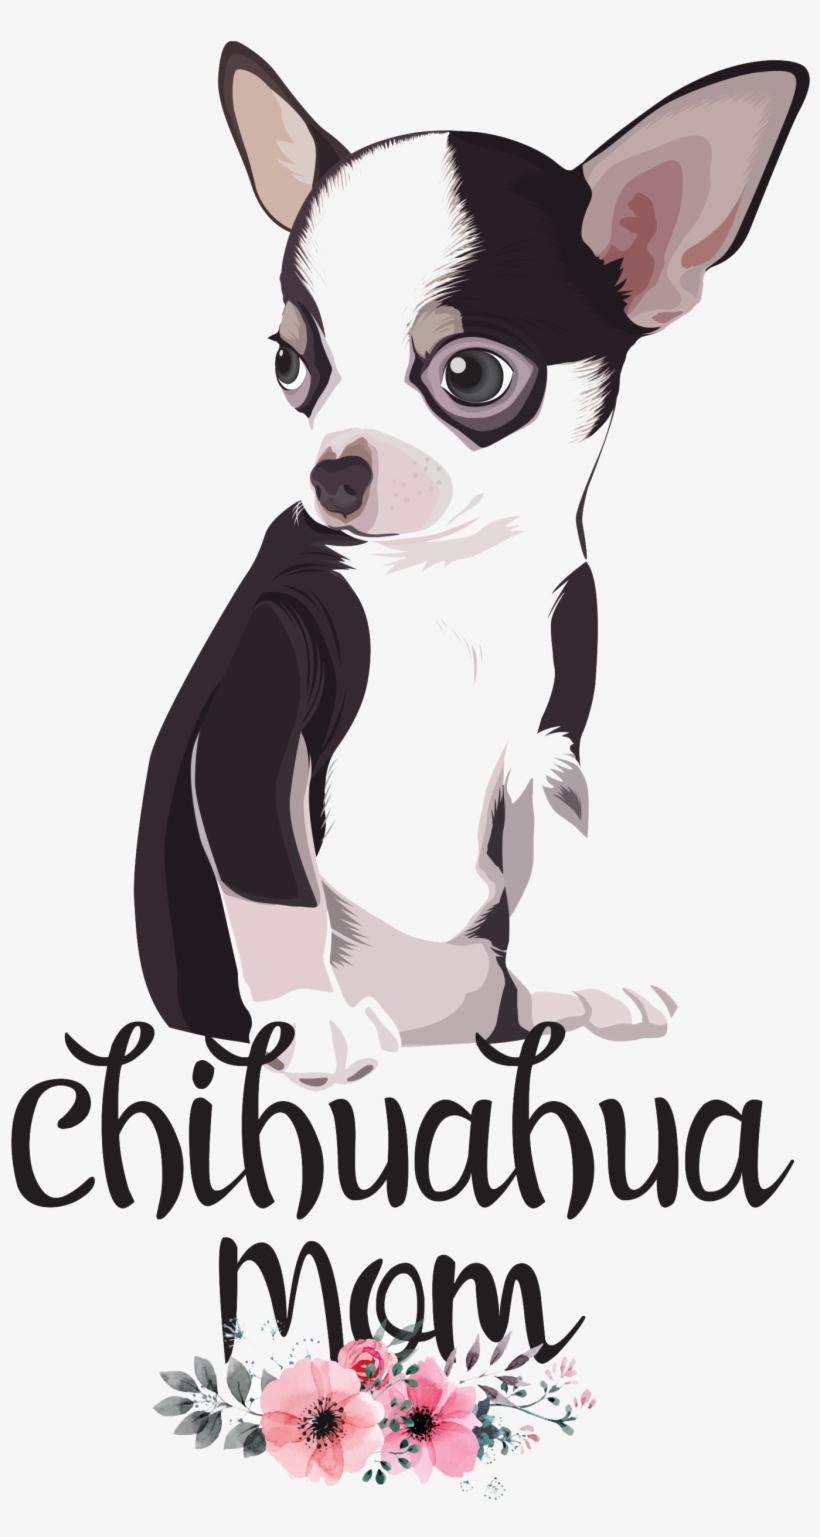 Download Chihuahua Mom - Free Transparent PNG Download - PNGkey